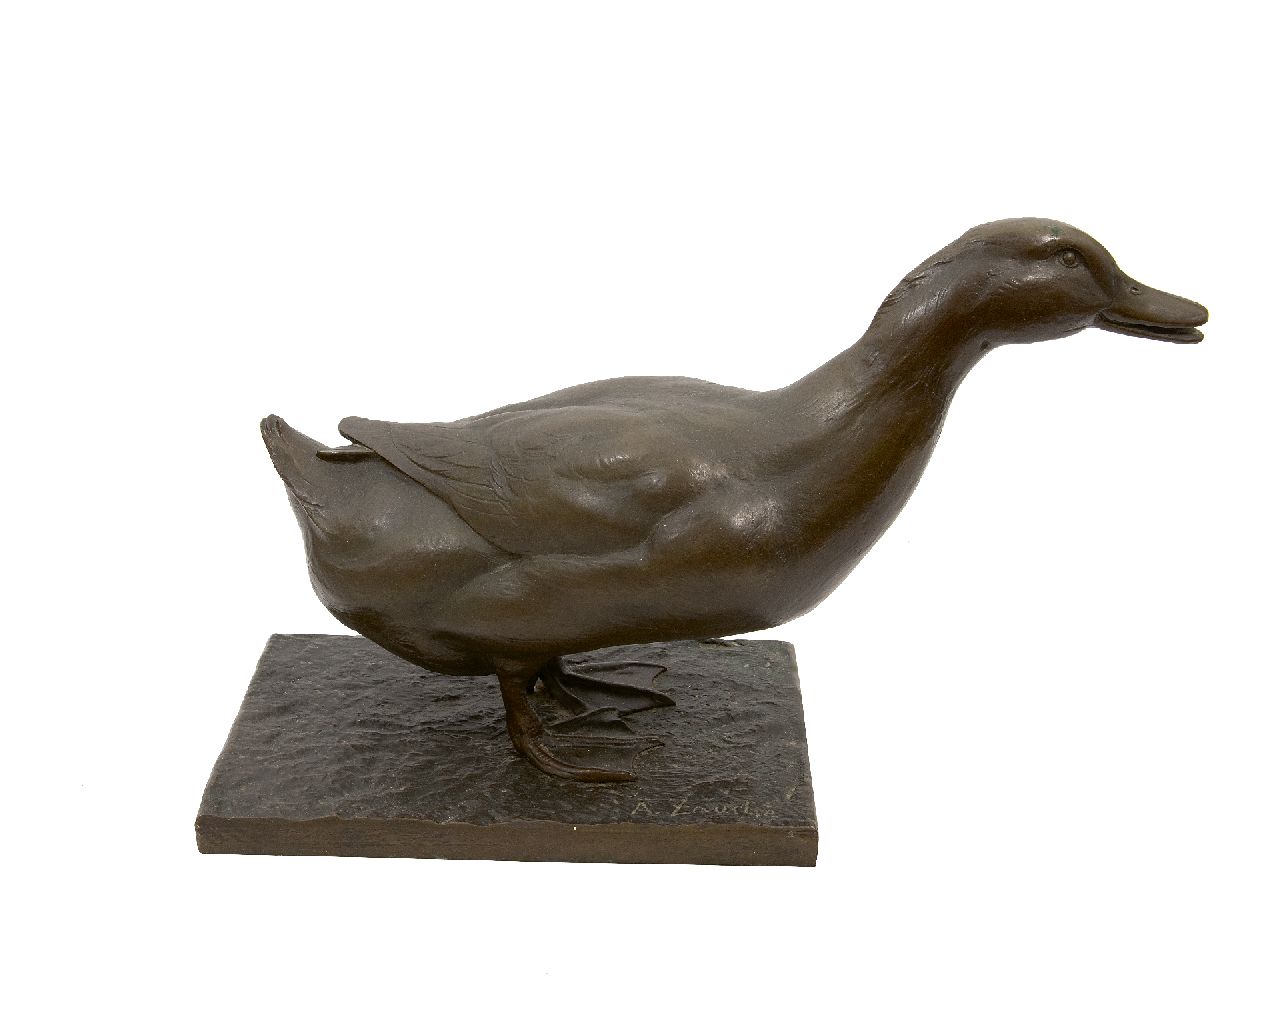 Zauche A.O.  | Arno 'Oswald' Zauche | Sculptures and objects offered for sale | Duck, bronze 39.0 x 59.0 cm, signed on the base